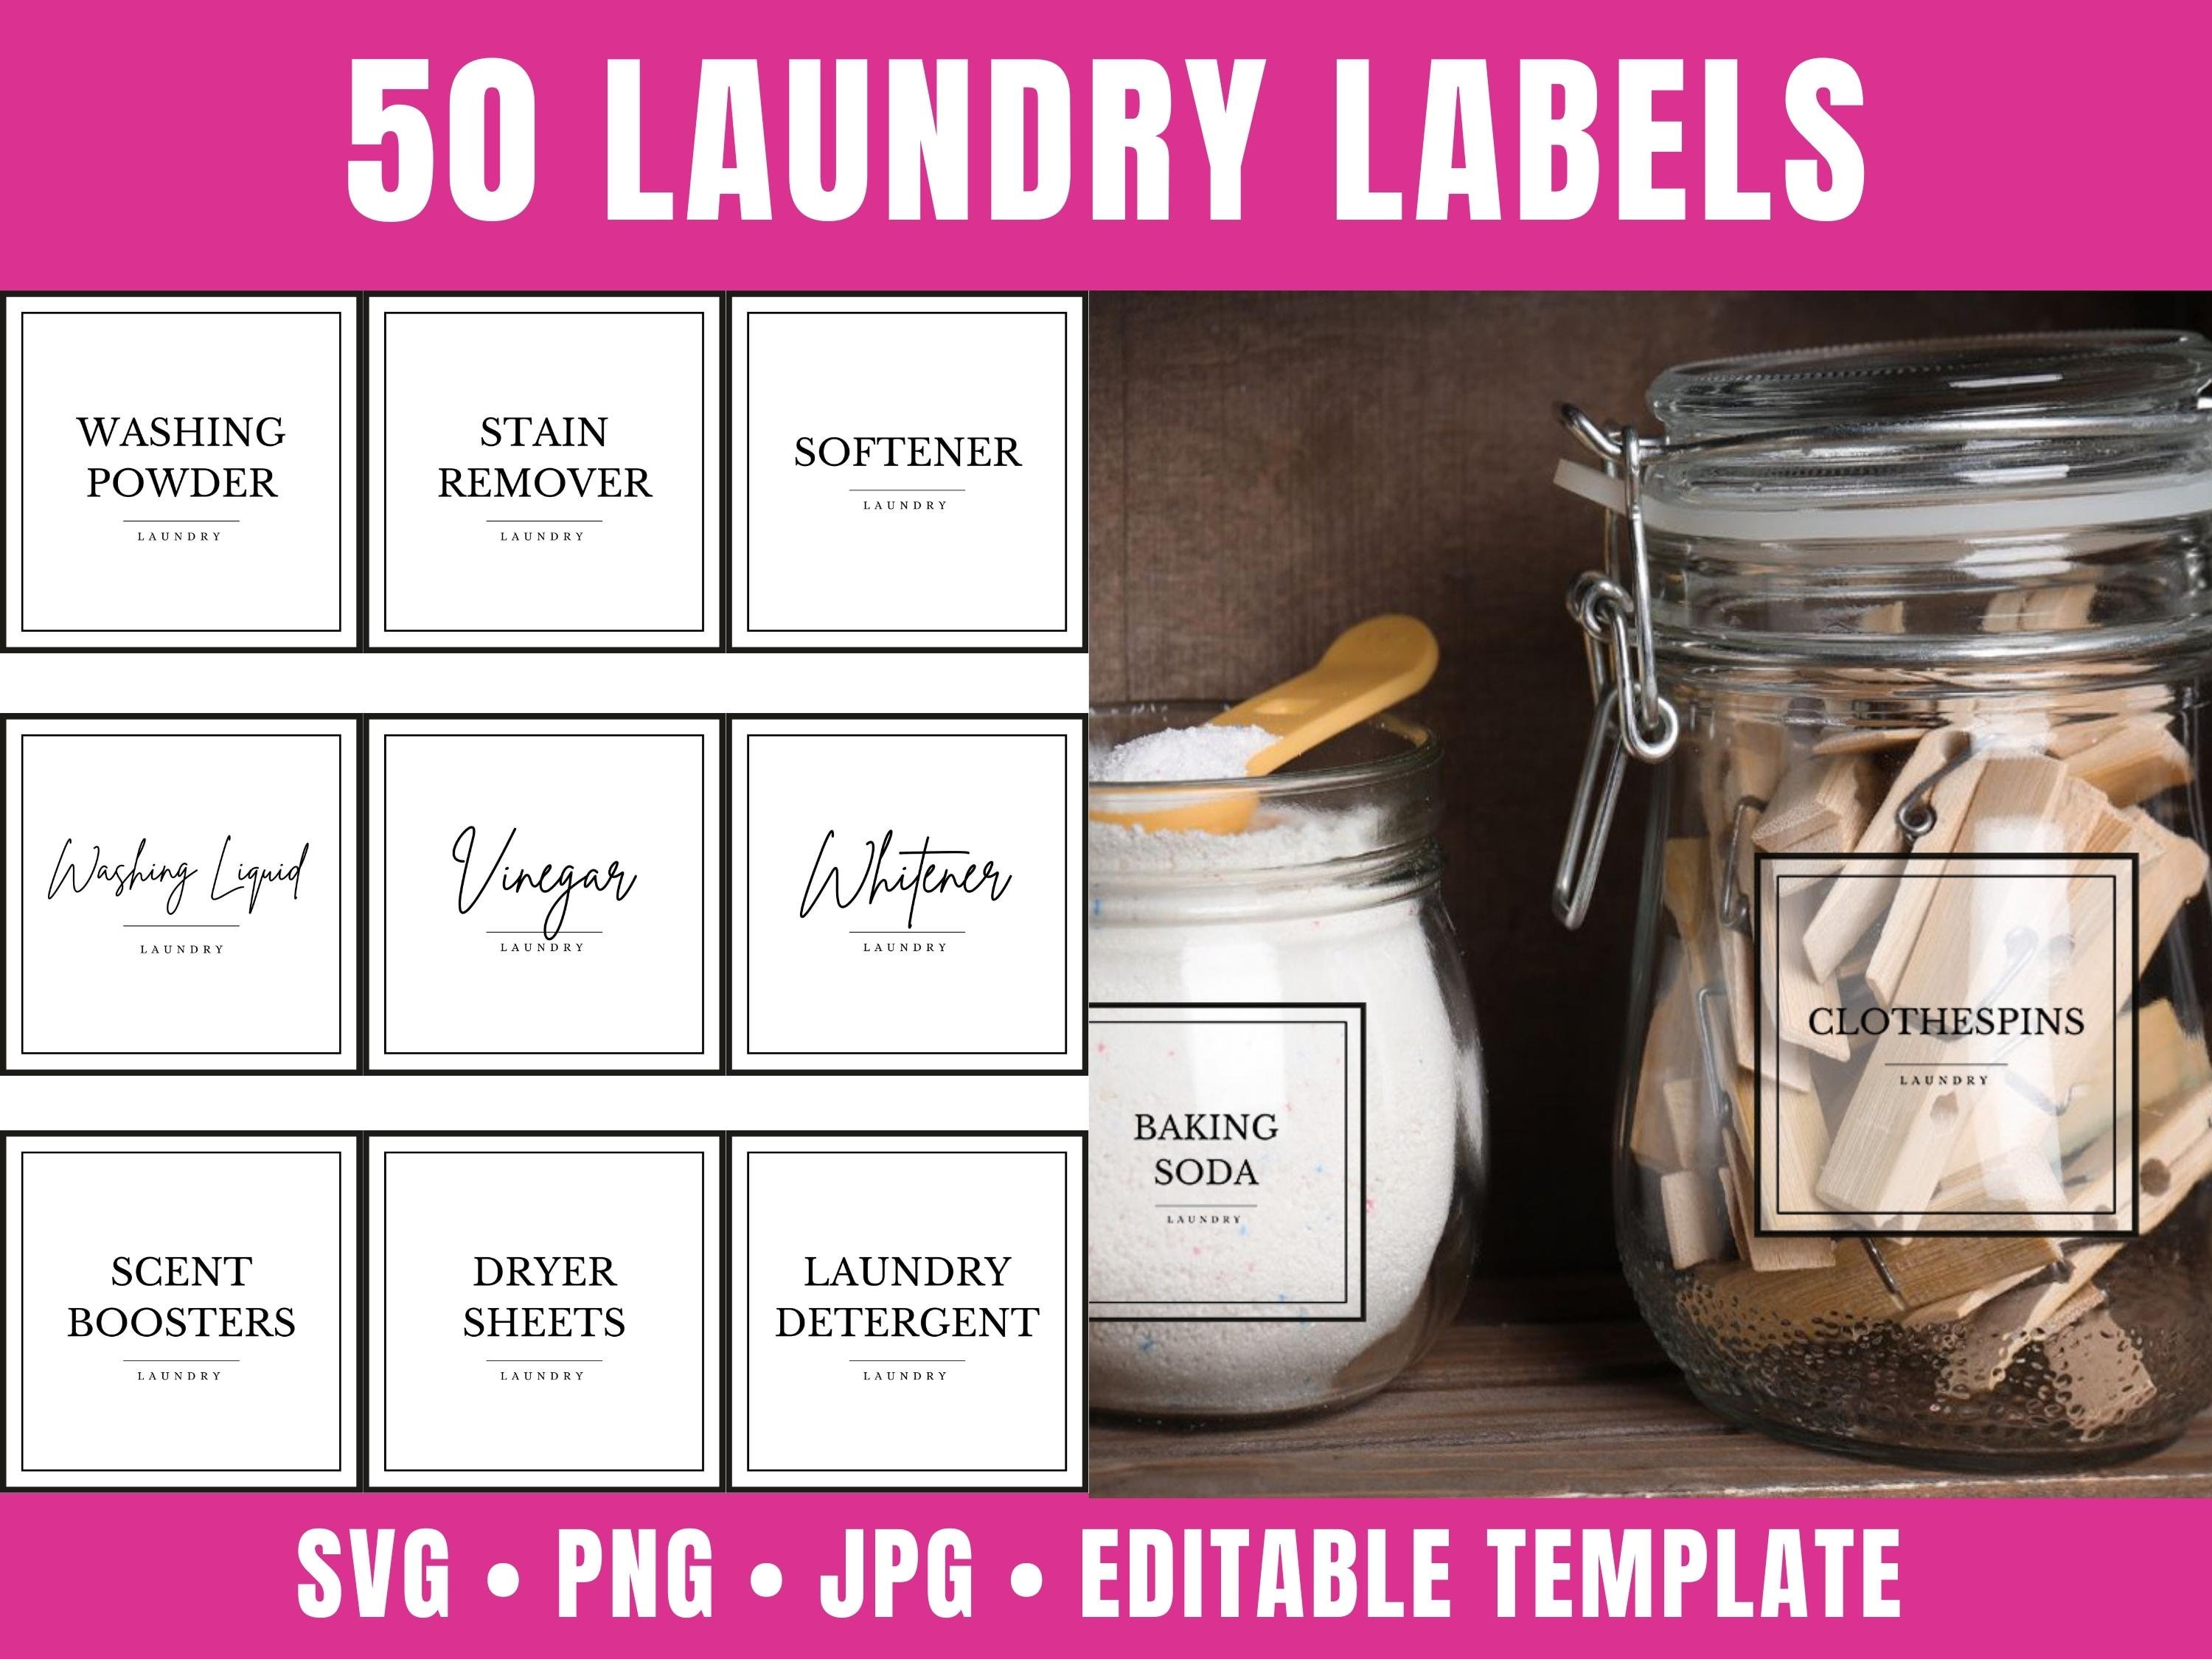 Laundry Container Labels/ Custom Labels for Jars and Bottles